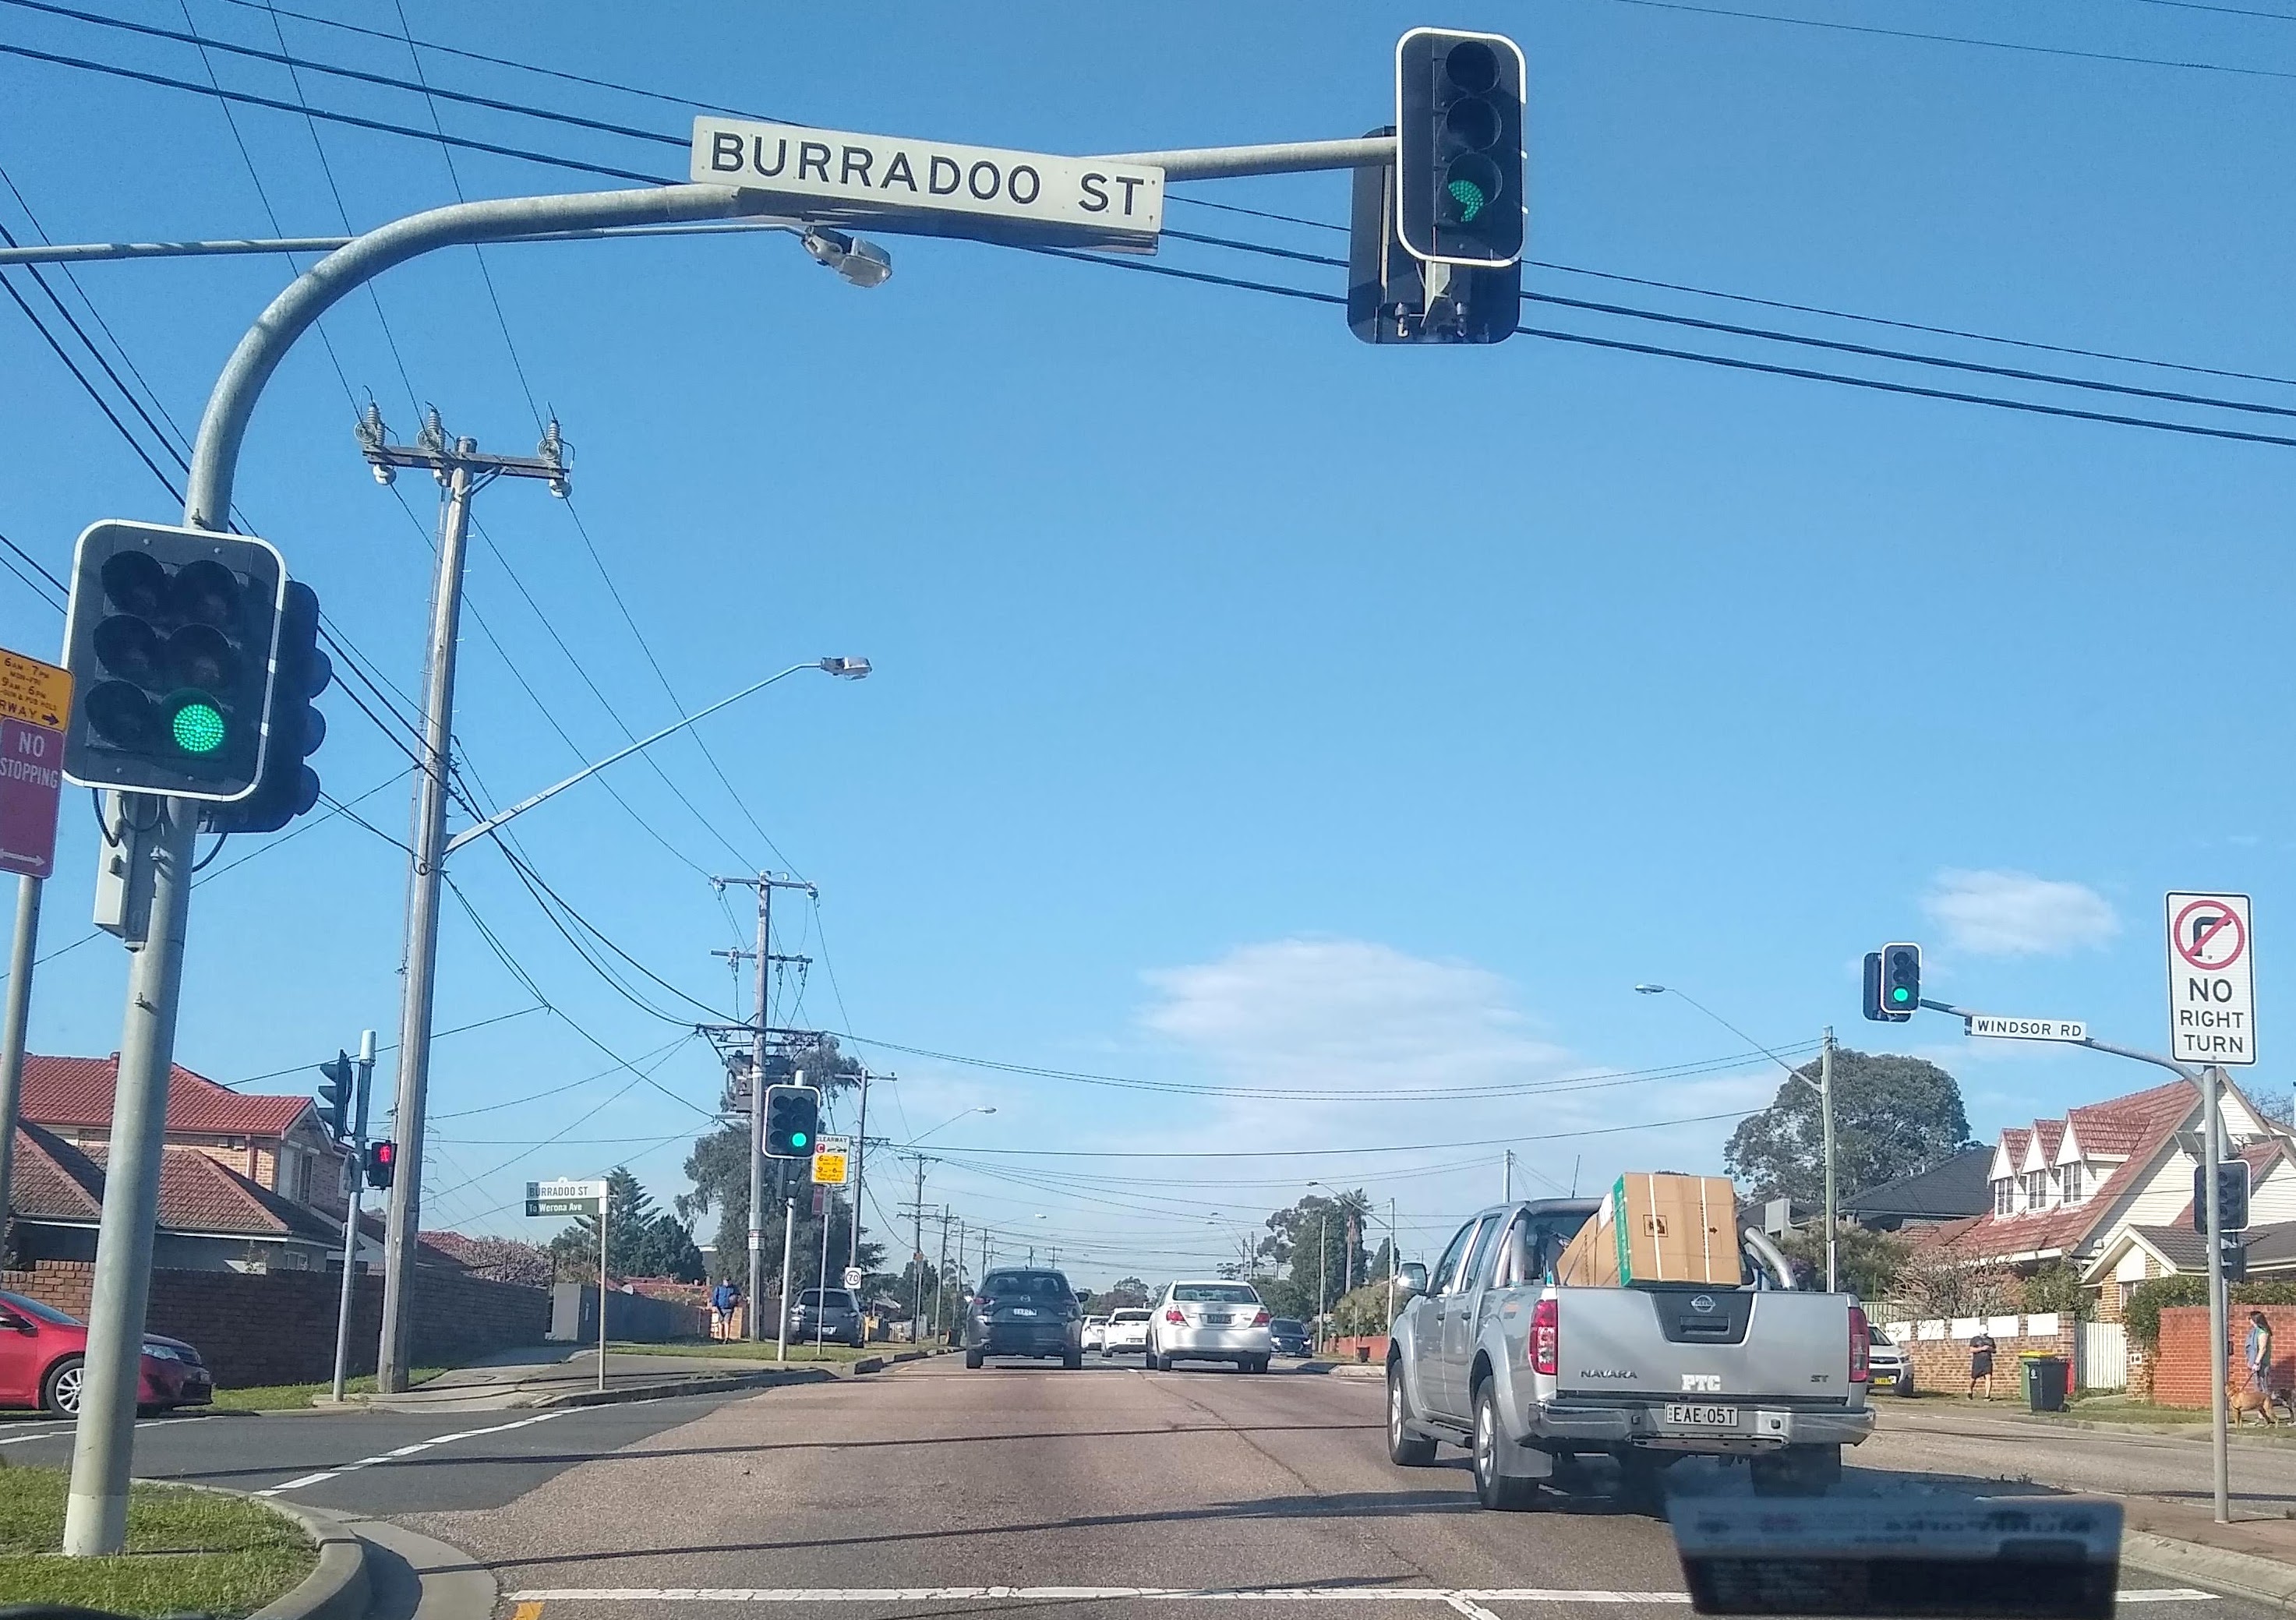 A Sydney suburban intersection. How many traffic lights do you see?